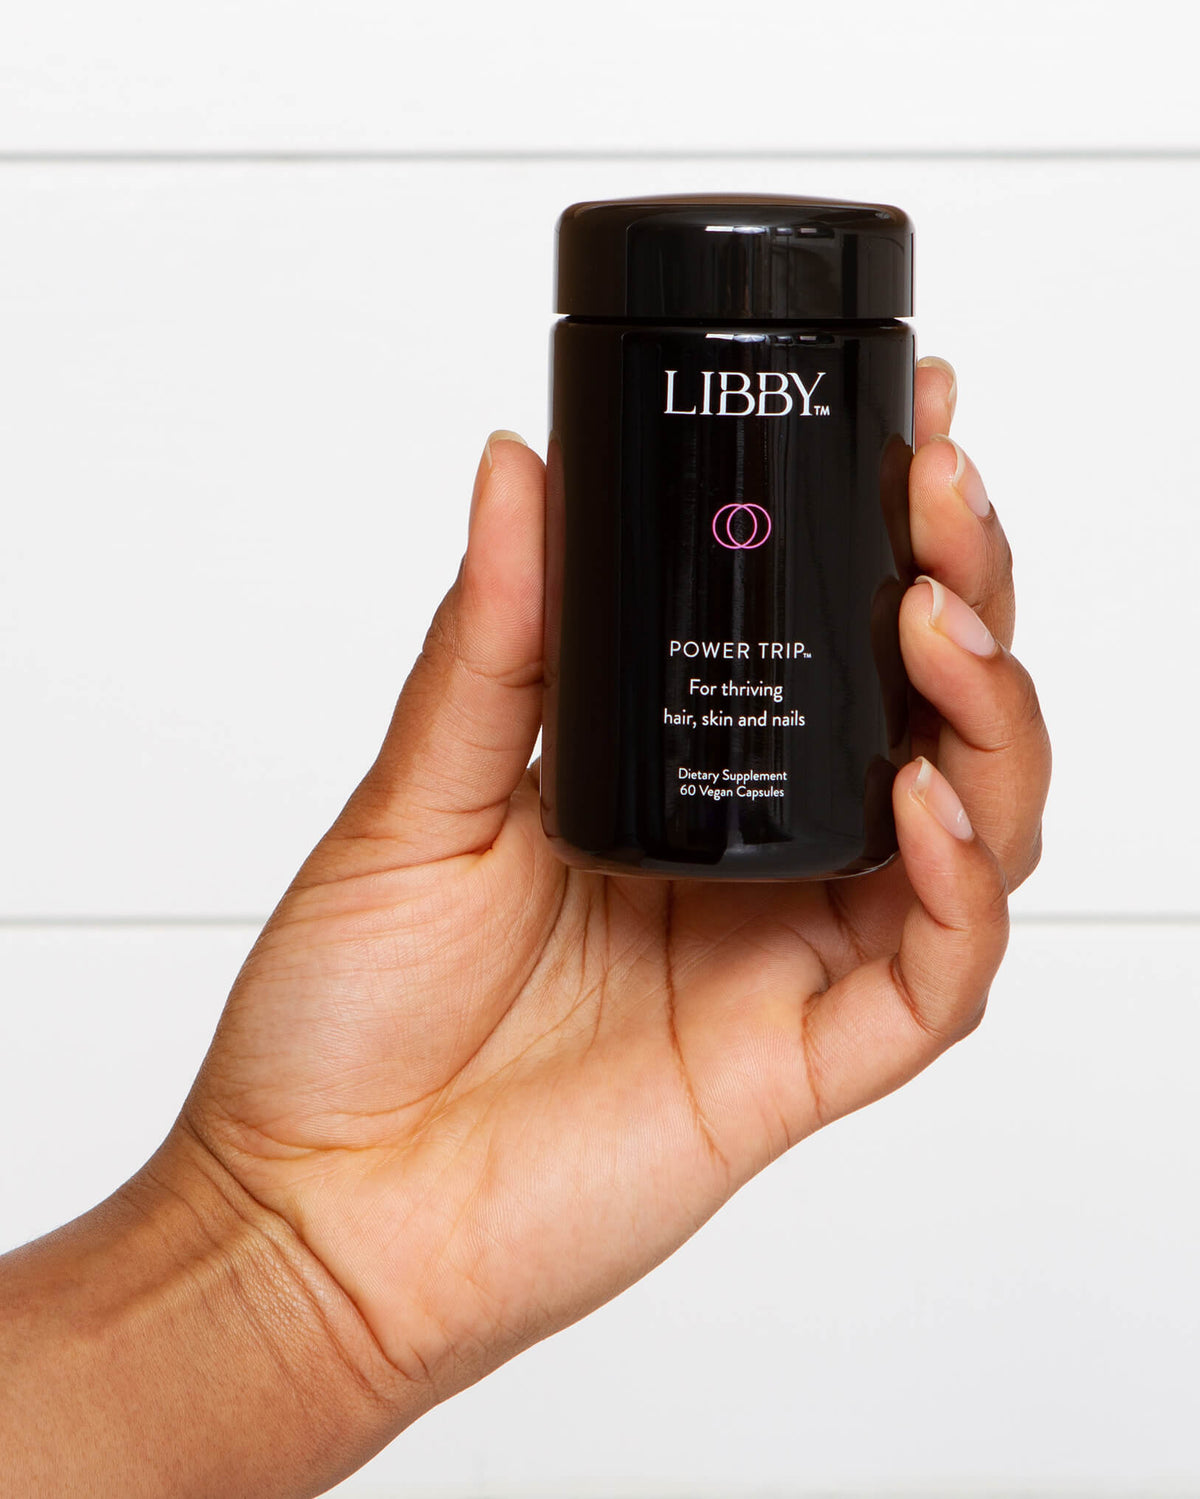 Power Trip supplement from Libby in a black bottle being featured in a hand.